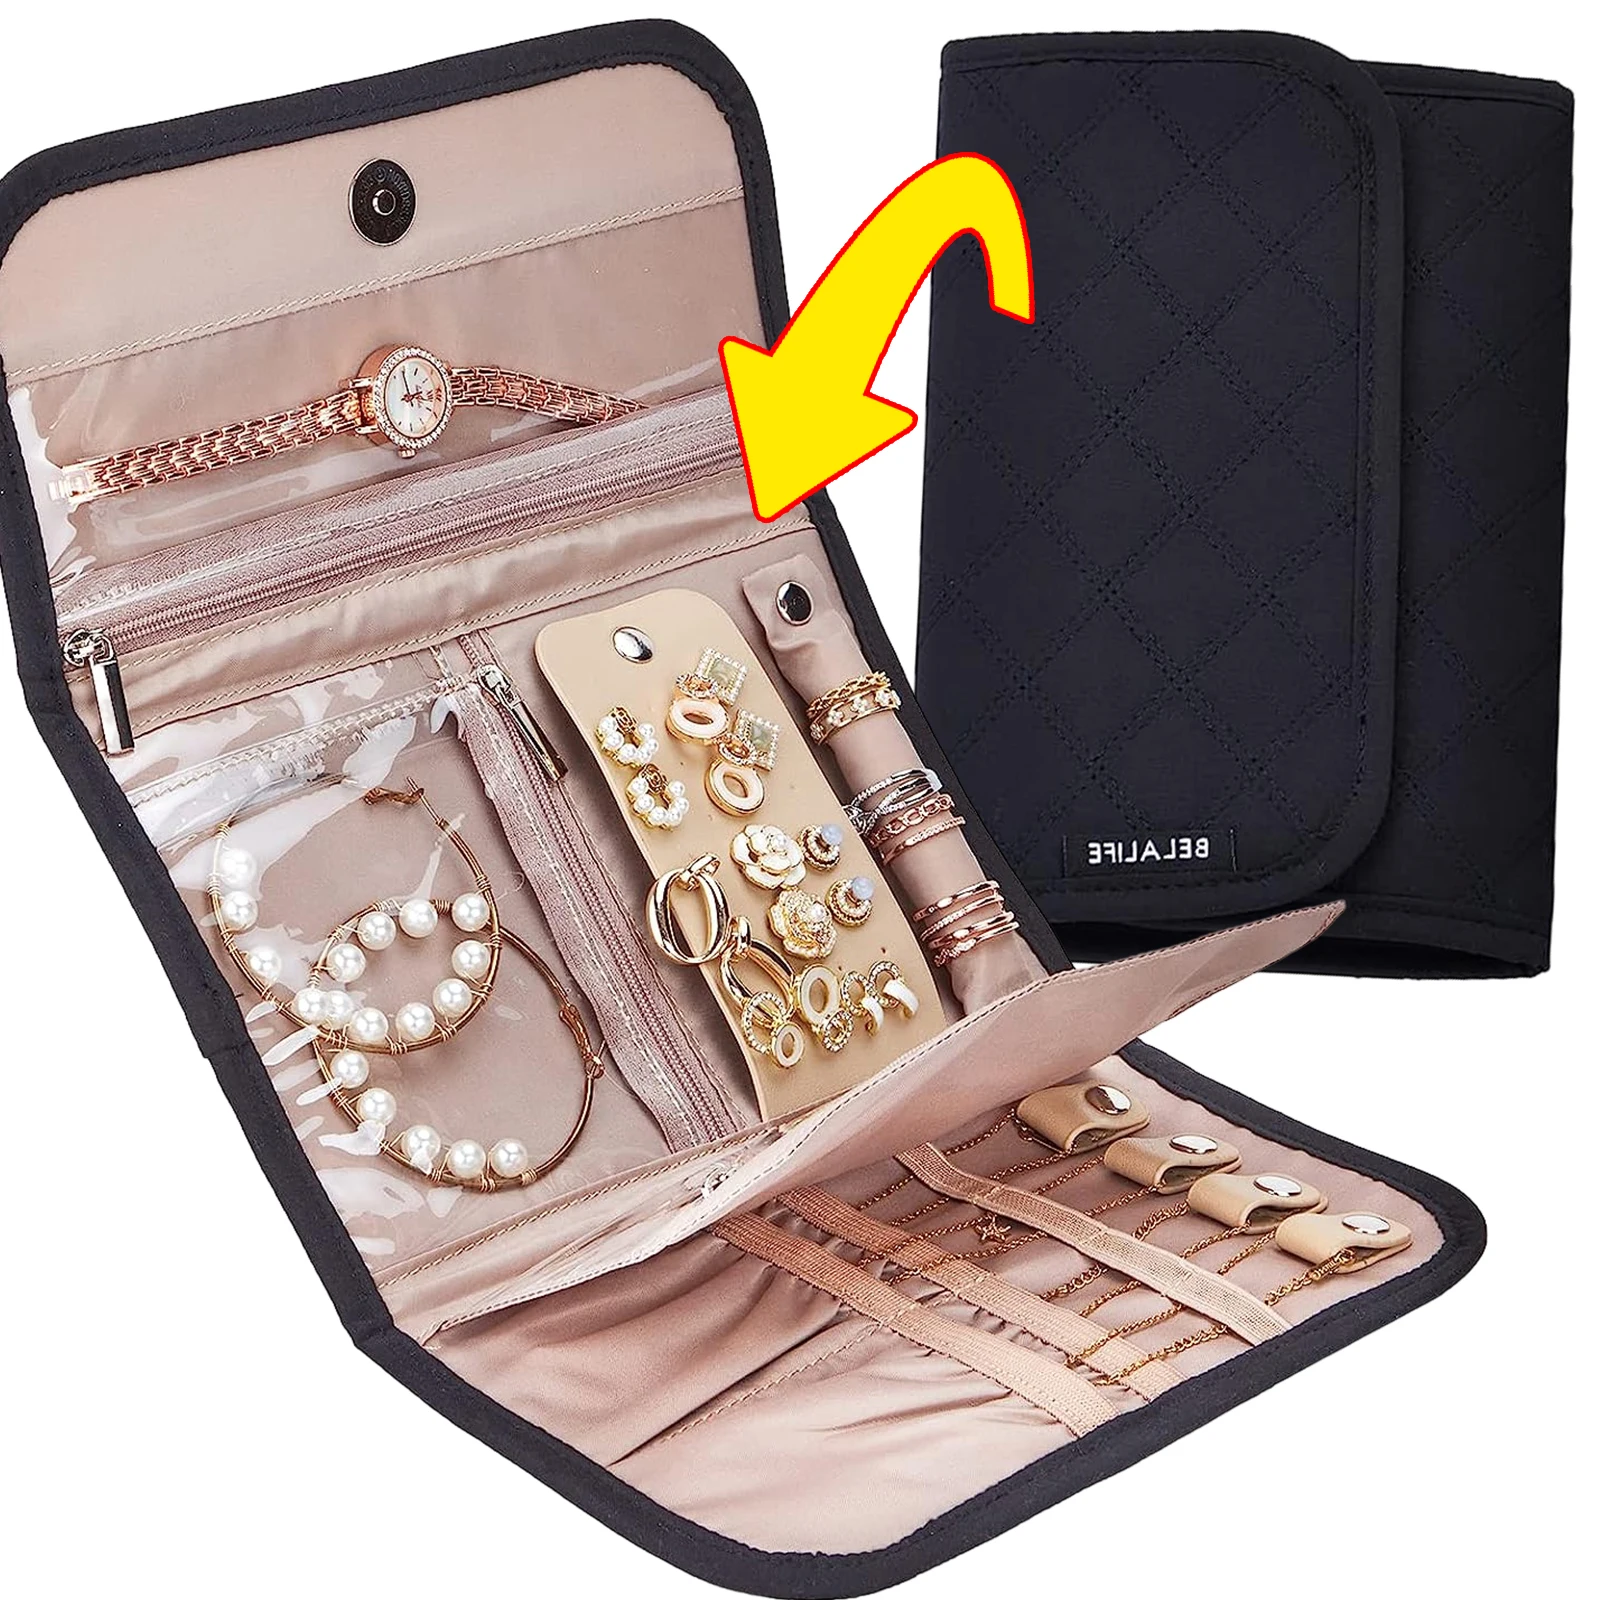 Roll Foldable Jewelry Case Travel Jewelry Organizer Portable for Journey Earrings Rings Diamond Necklaces Brooches Storage Bag floating keychain floats keychains boat surfboard surfing decors buoy water portable rings foam